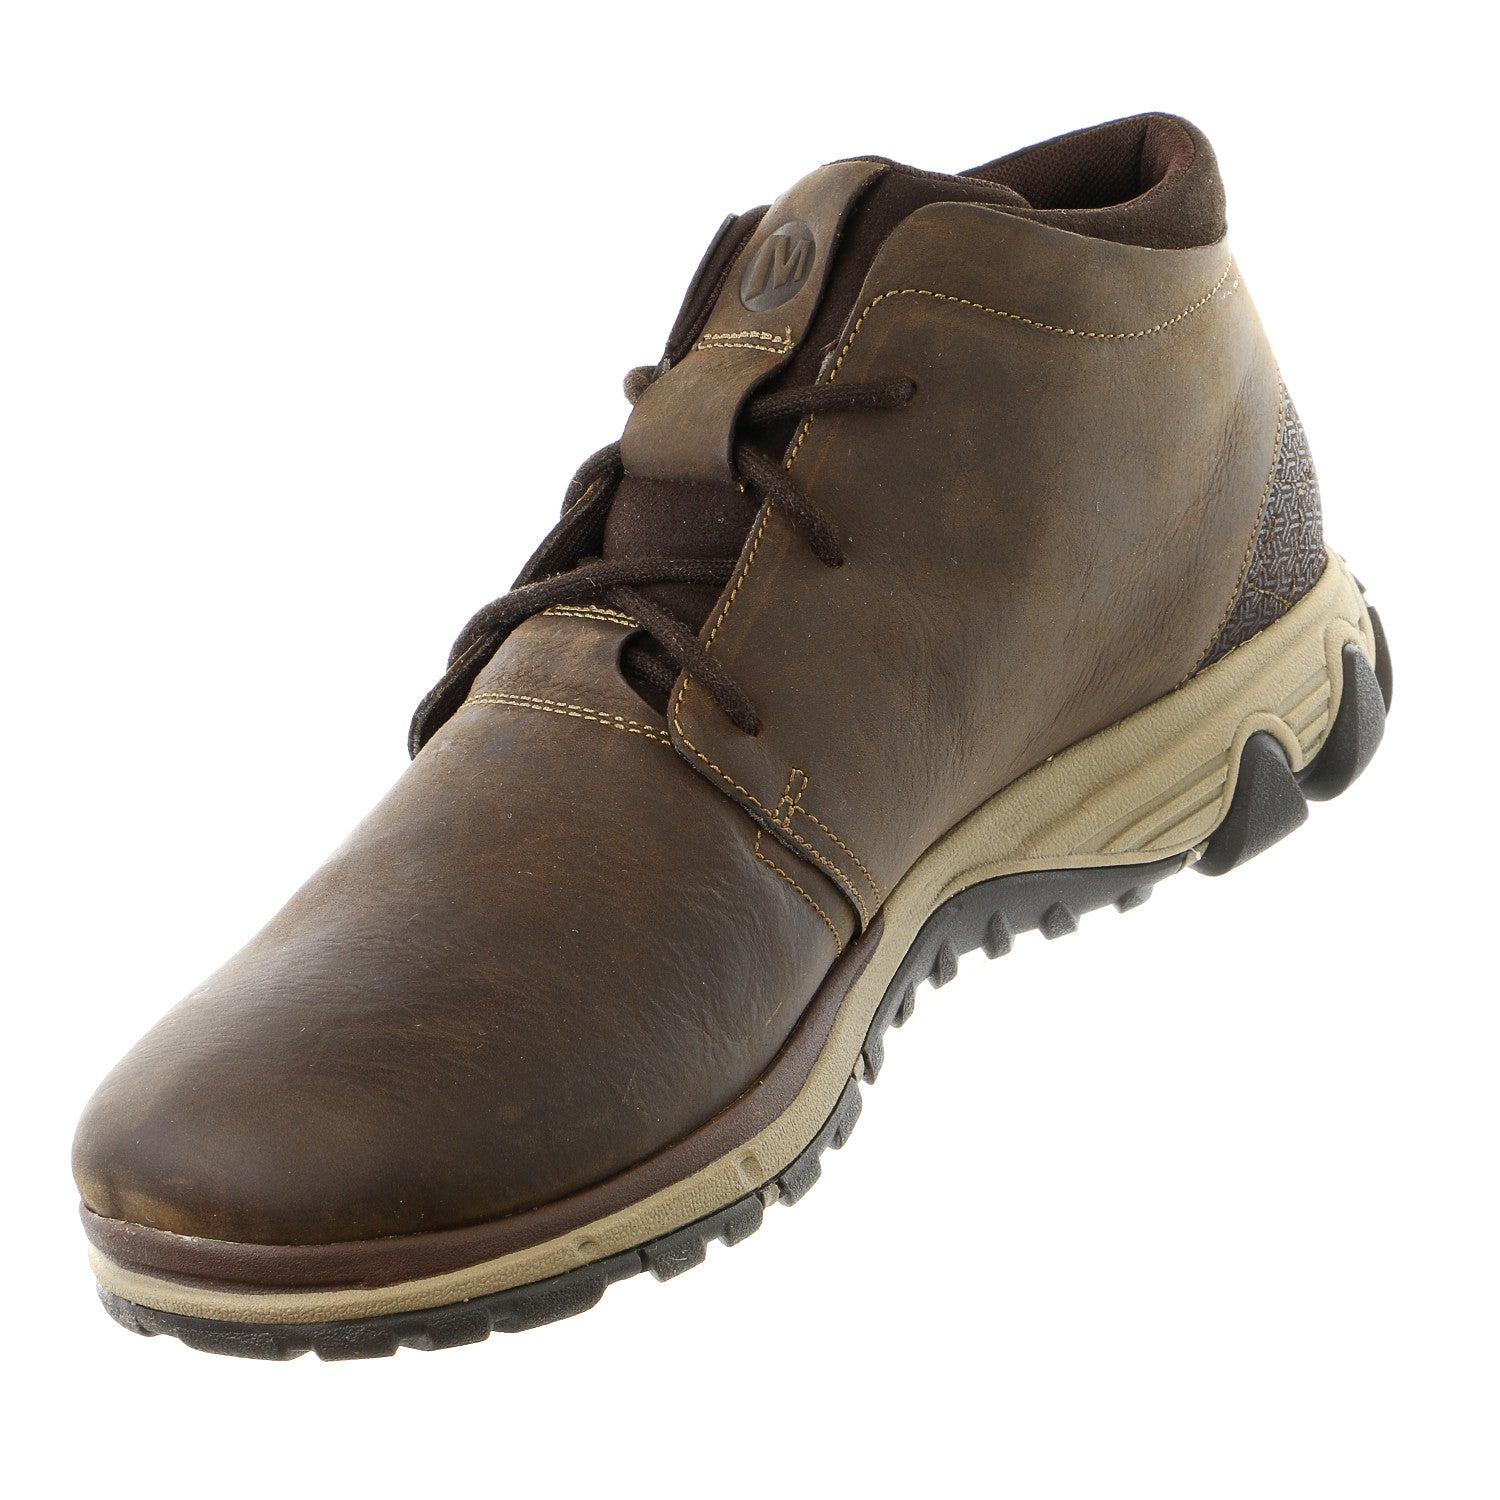 Verwacht het Onderdompeling Spectaculair Merrell All Out Blazer Chukka Leather Lace-Up - Men's - Shoplifestyle